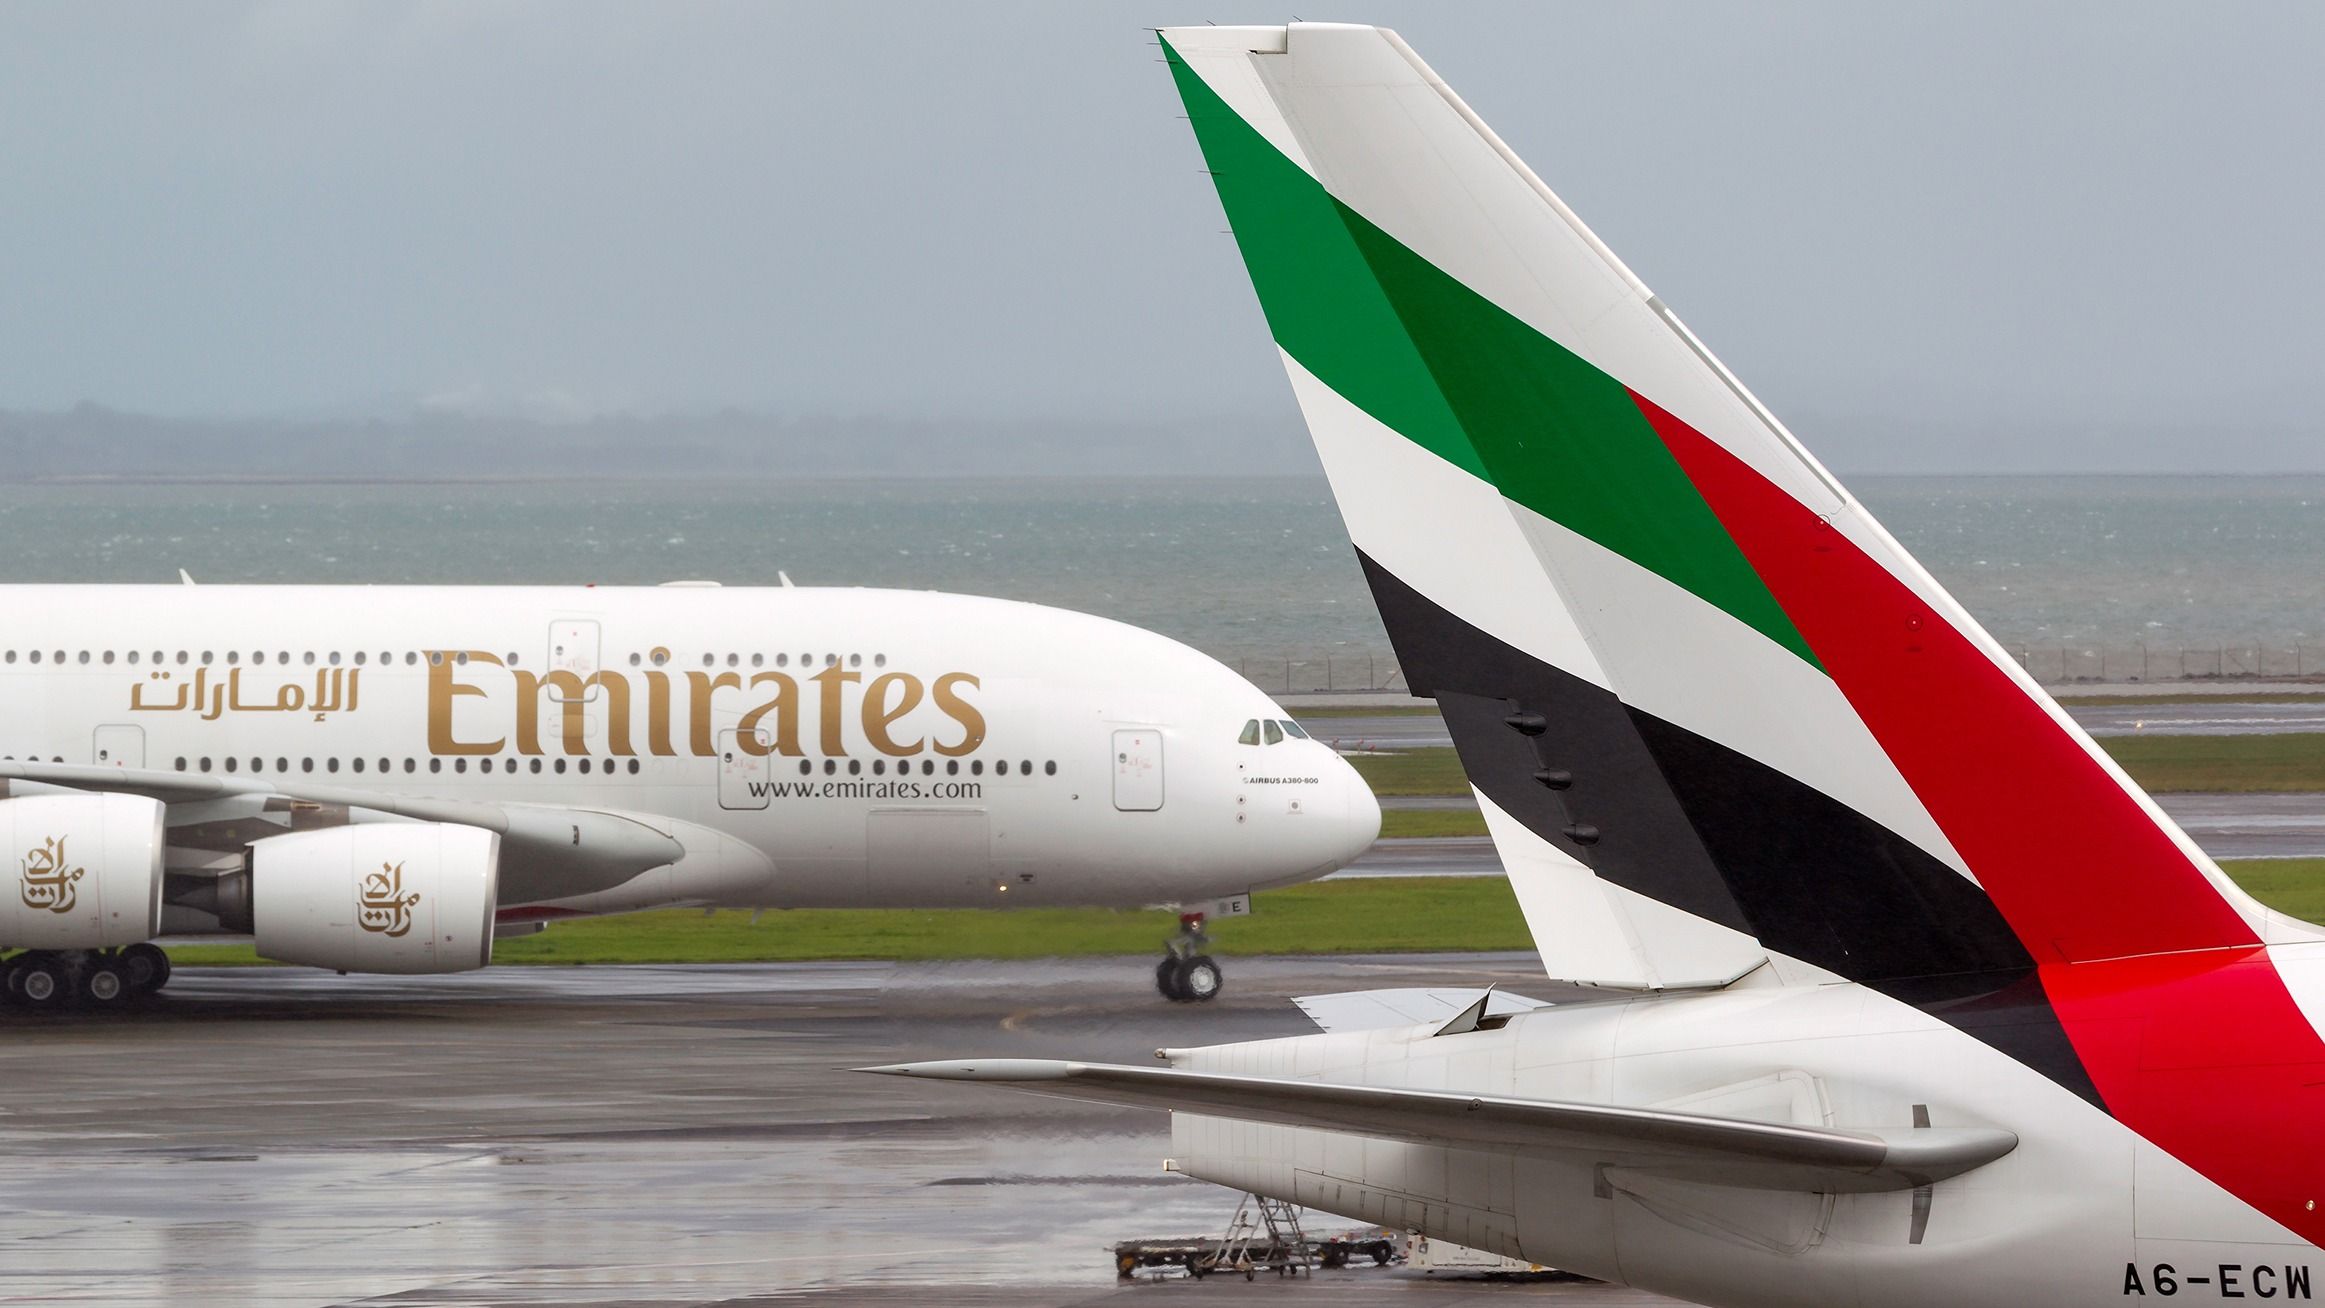 An Emirates Airbus A380 on a wet airport apron.